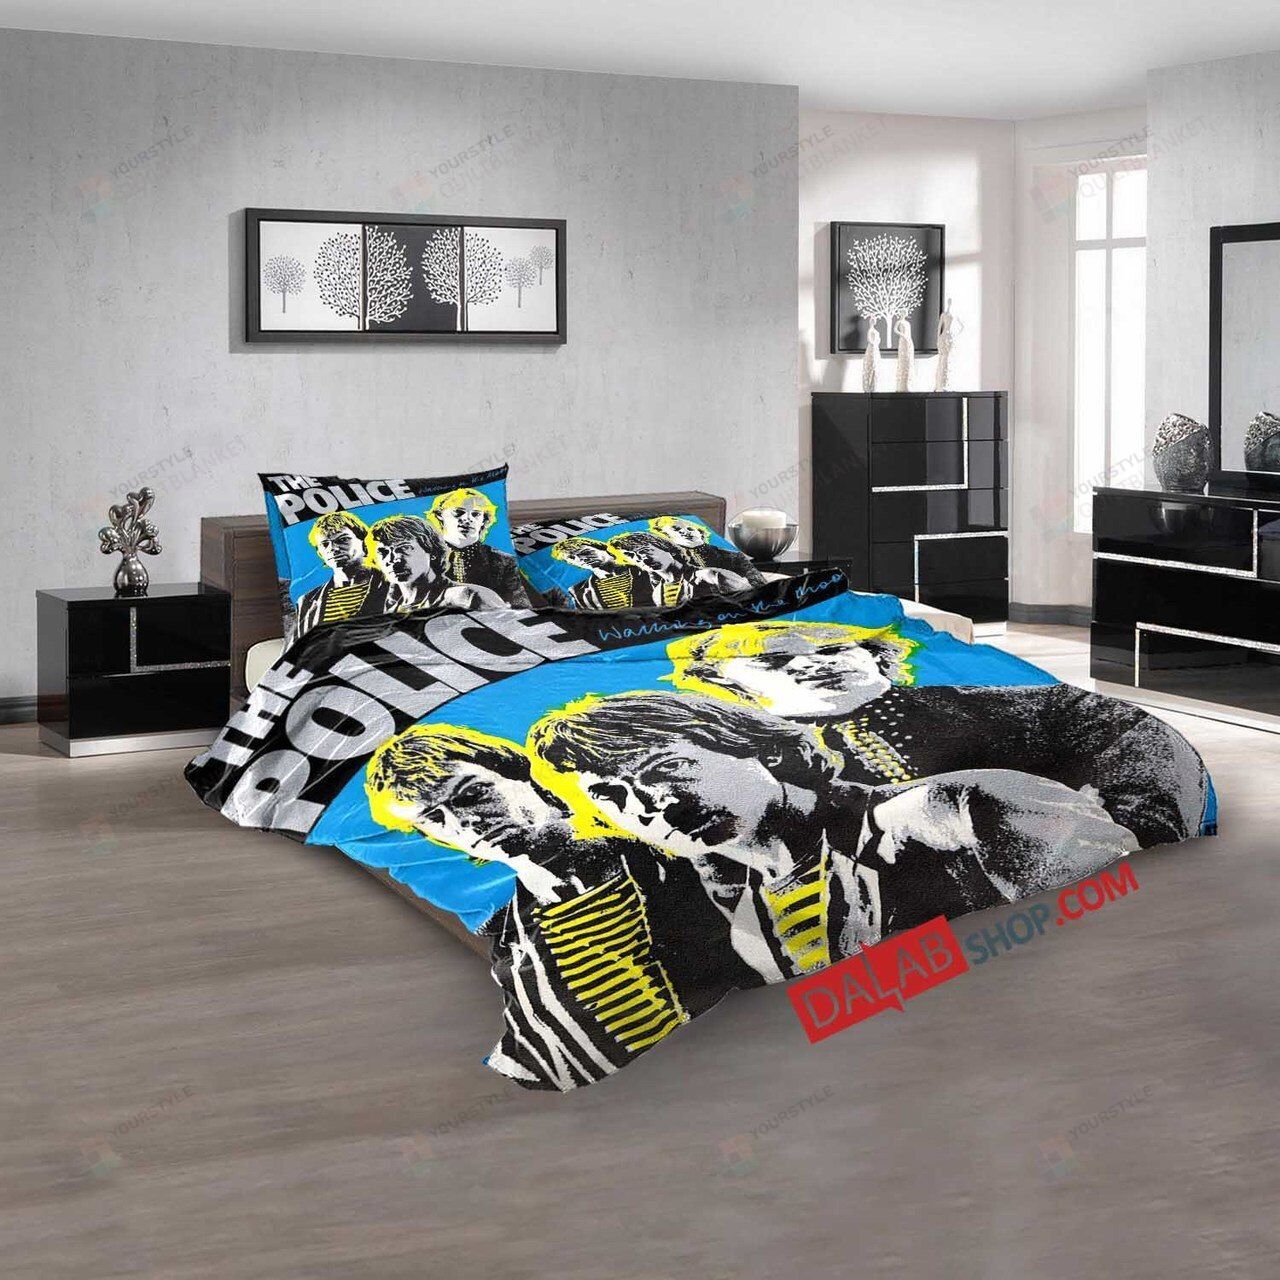 Musical Artists '80s The Police1d 3d Customized Duvet Cover Bedroom Sets Bedding Sets